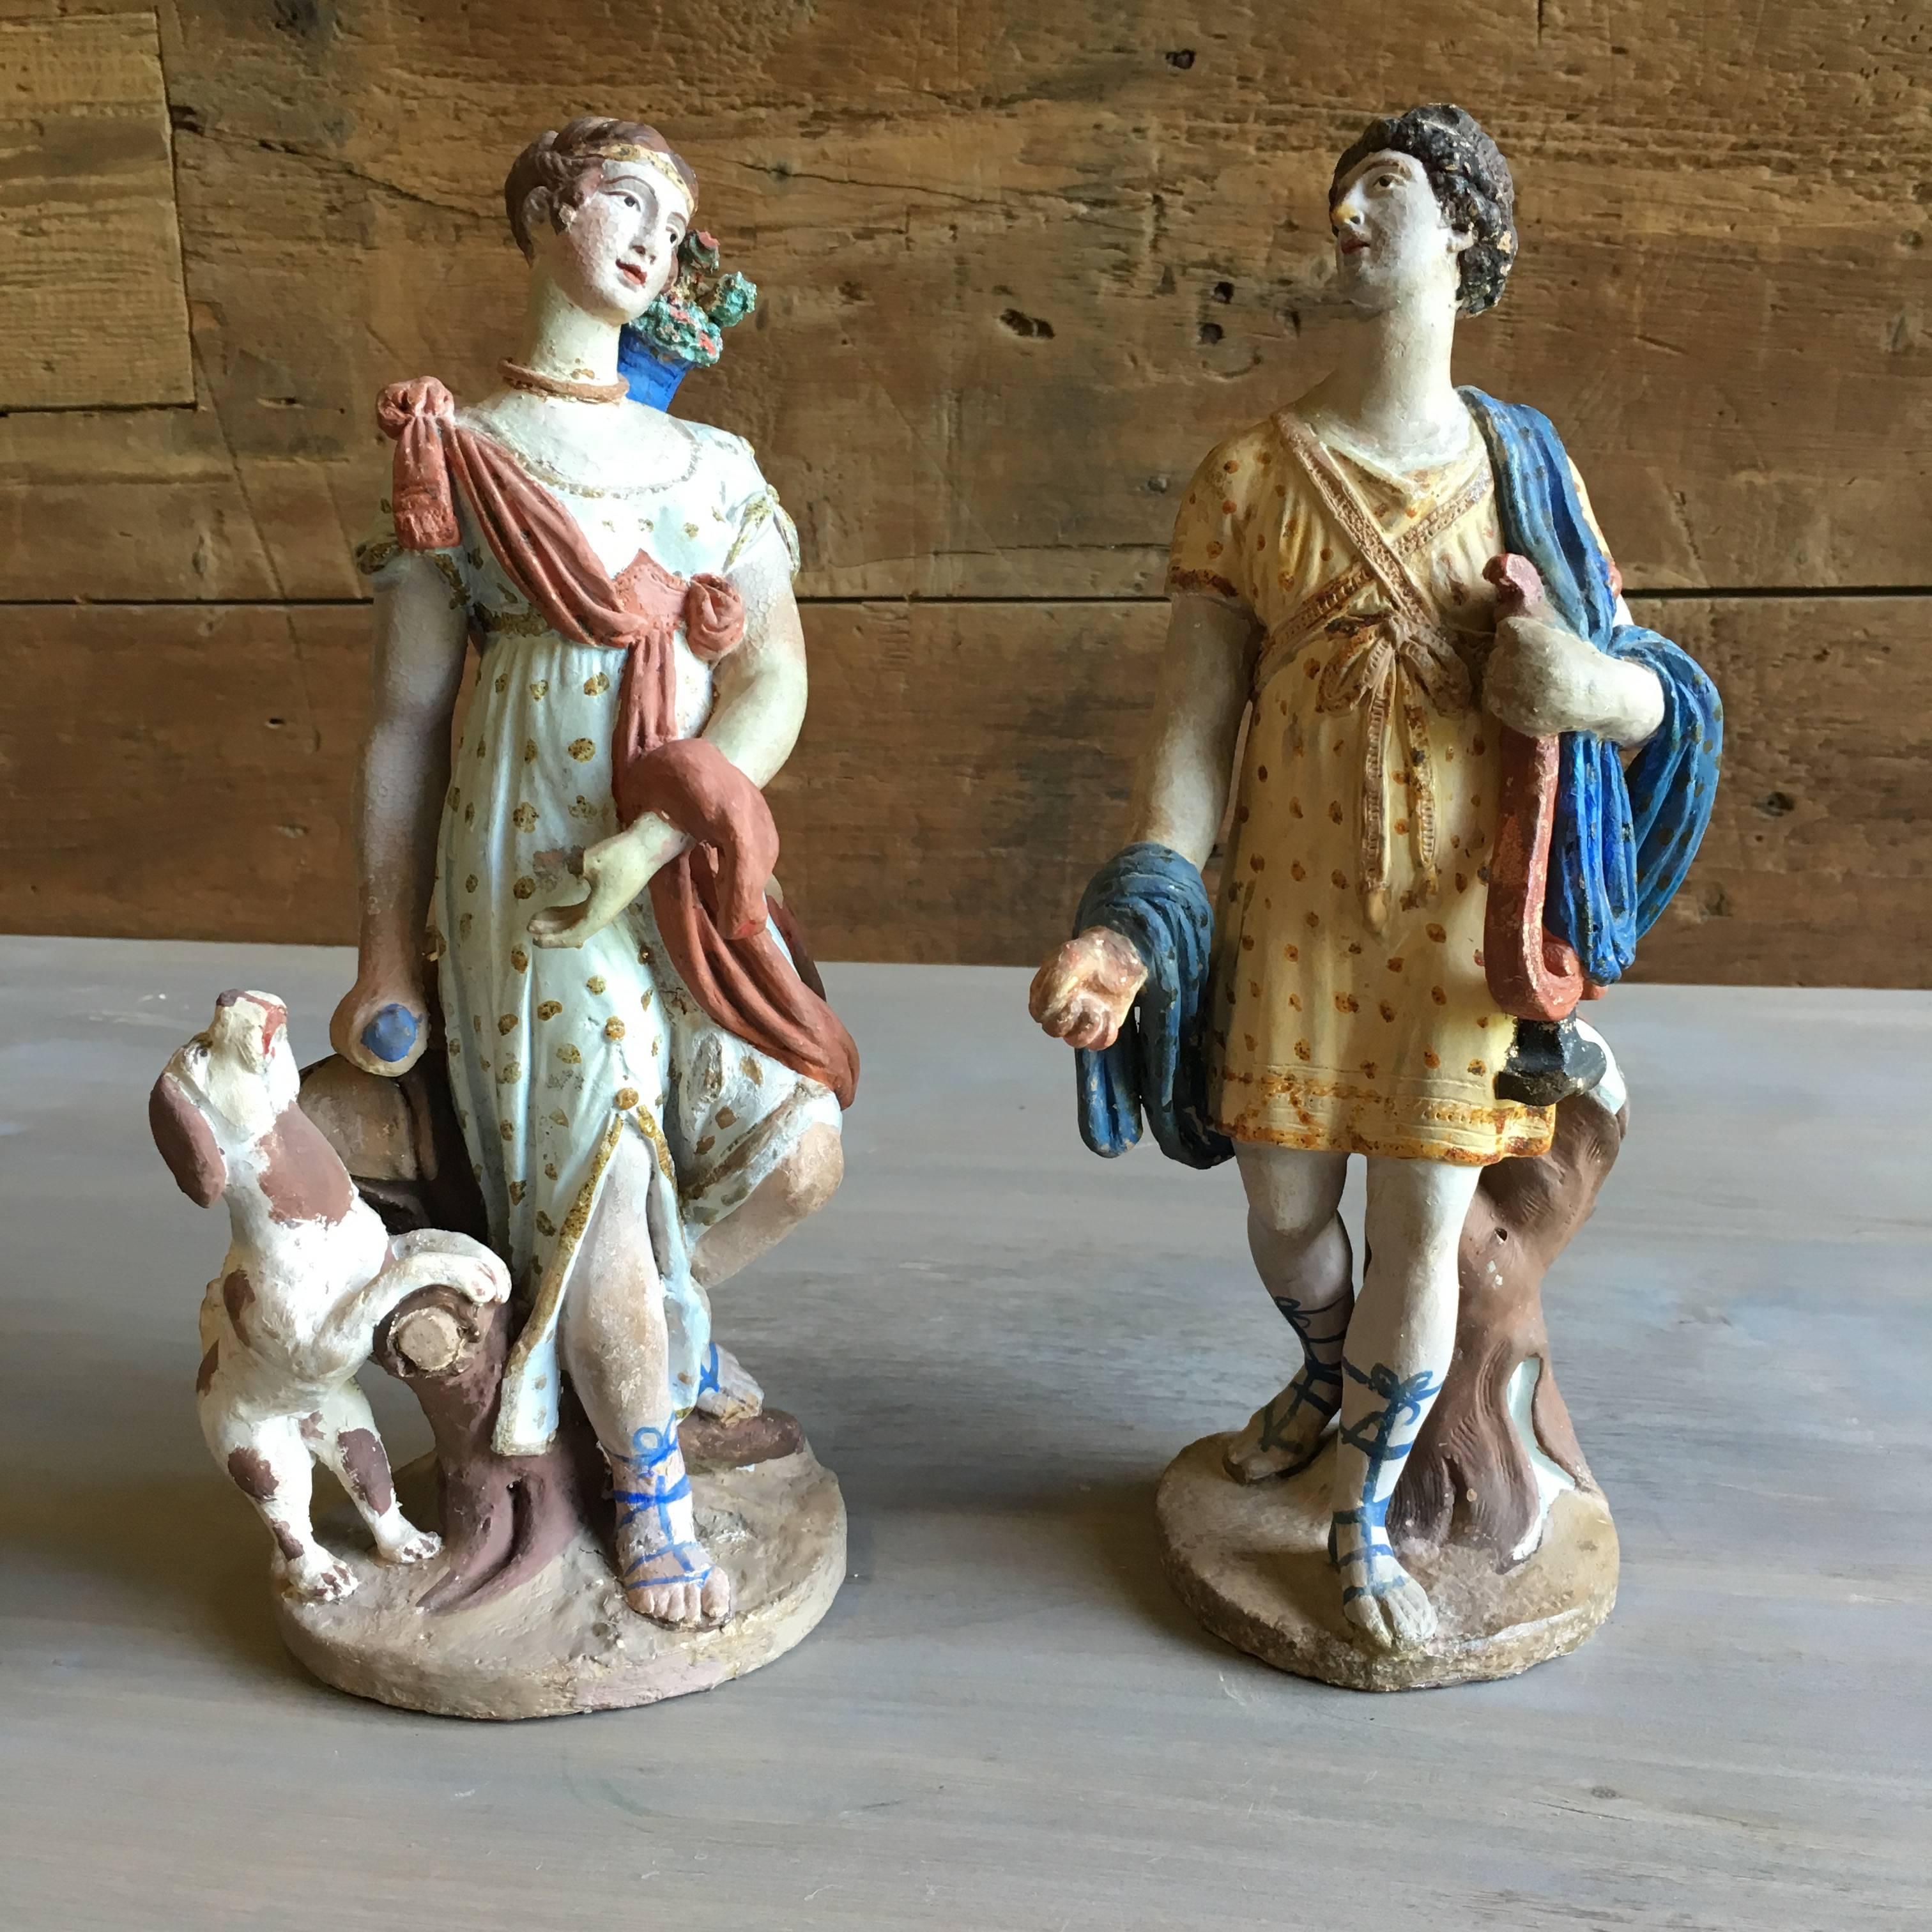 A pair of classical style figurines in painted terra cotta, French late 18th century. From the personal collection of Pierre Moulin, author of French Country style books and founder of the Pierre Deux shops.